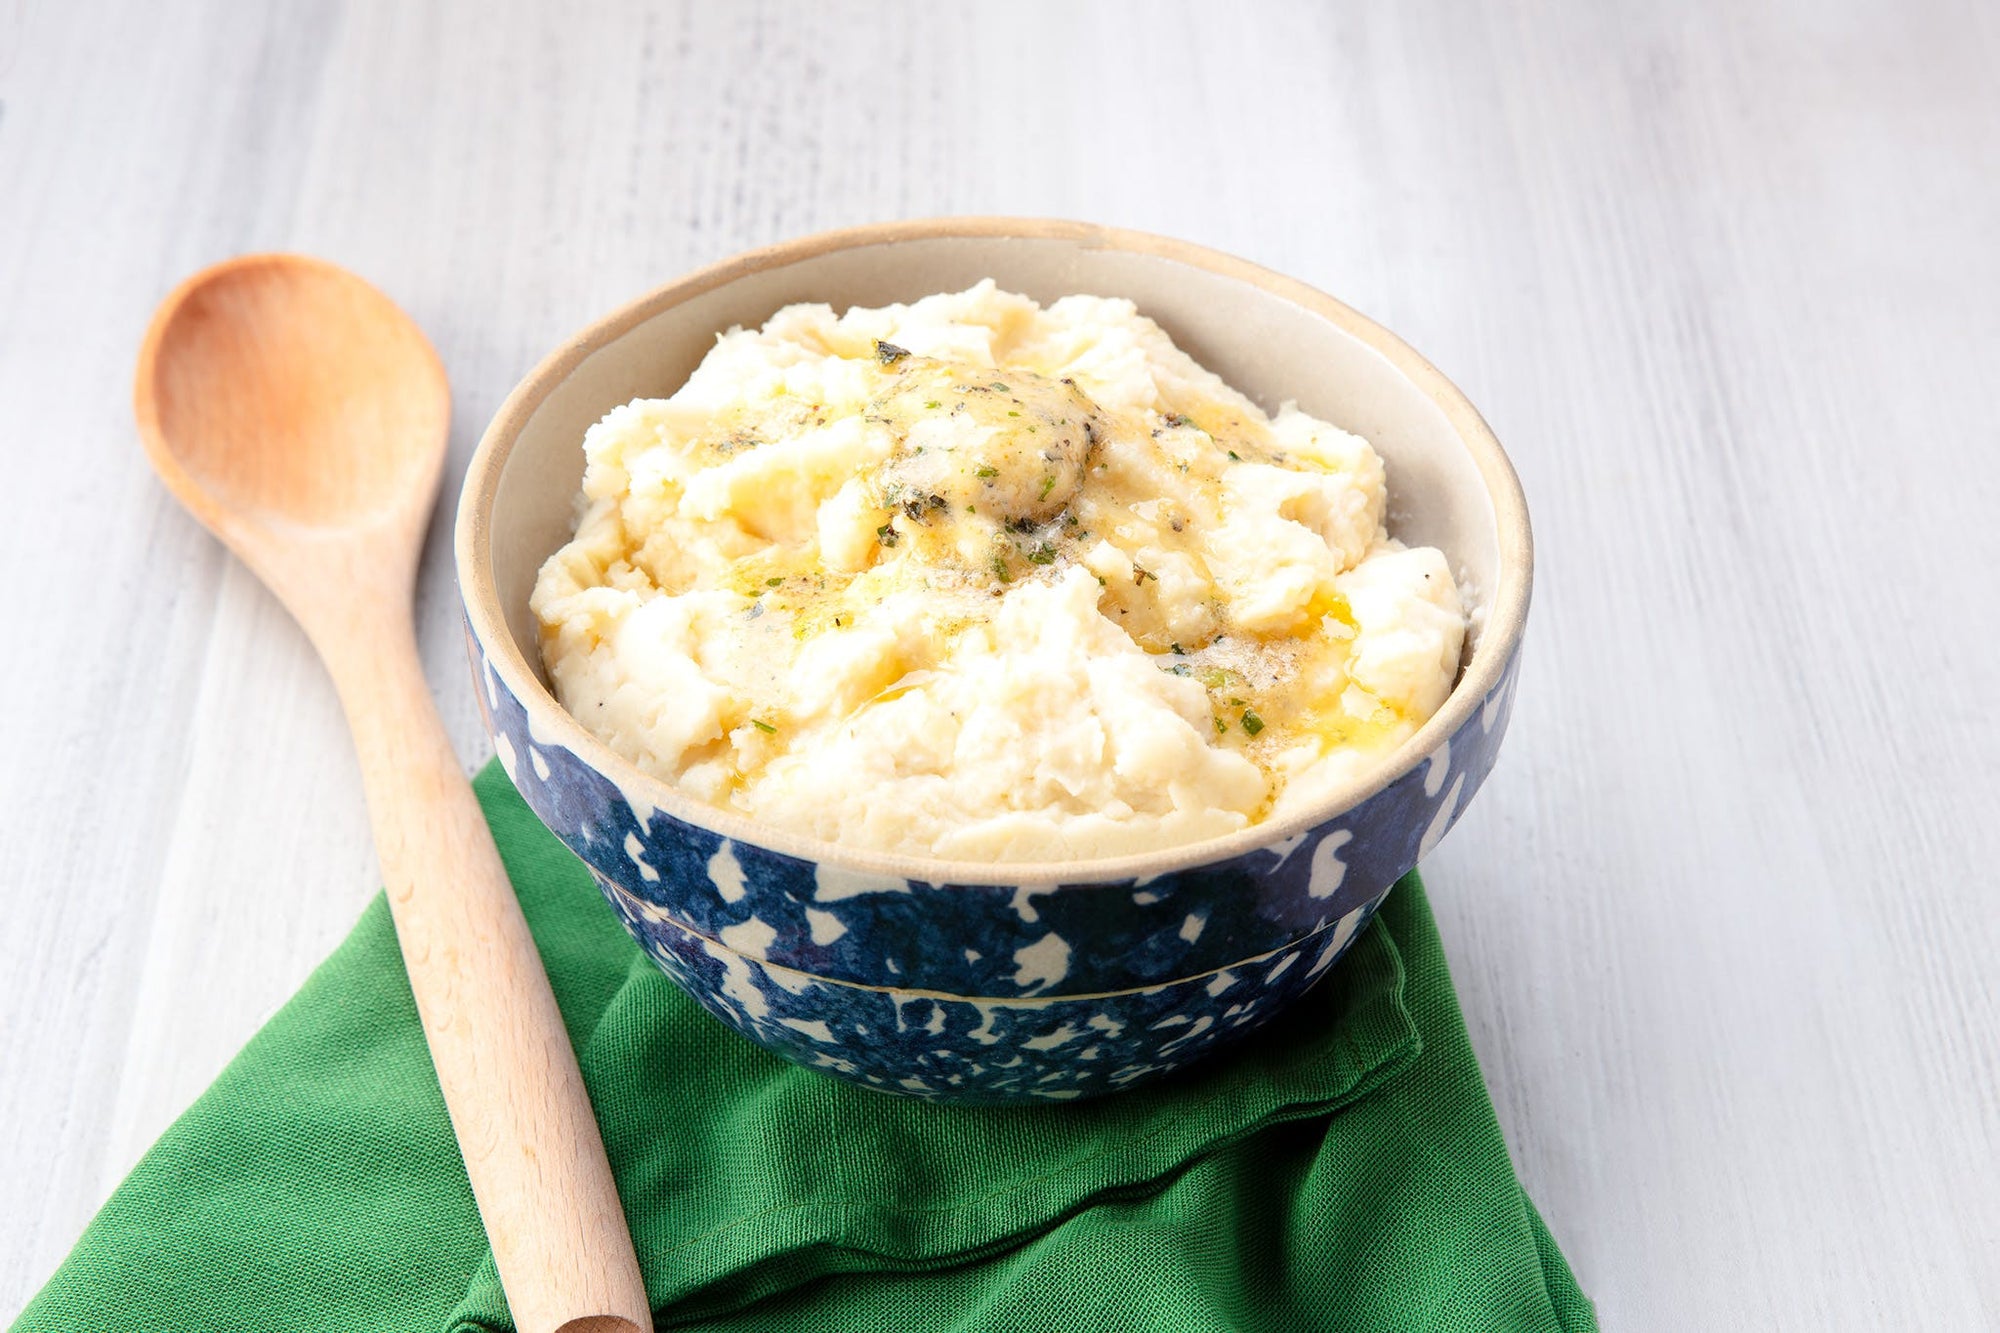 Mashed Potatoes with Epicurean Butter Roasted Garlic Herb Flavored Butter